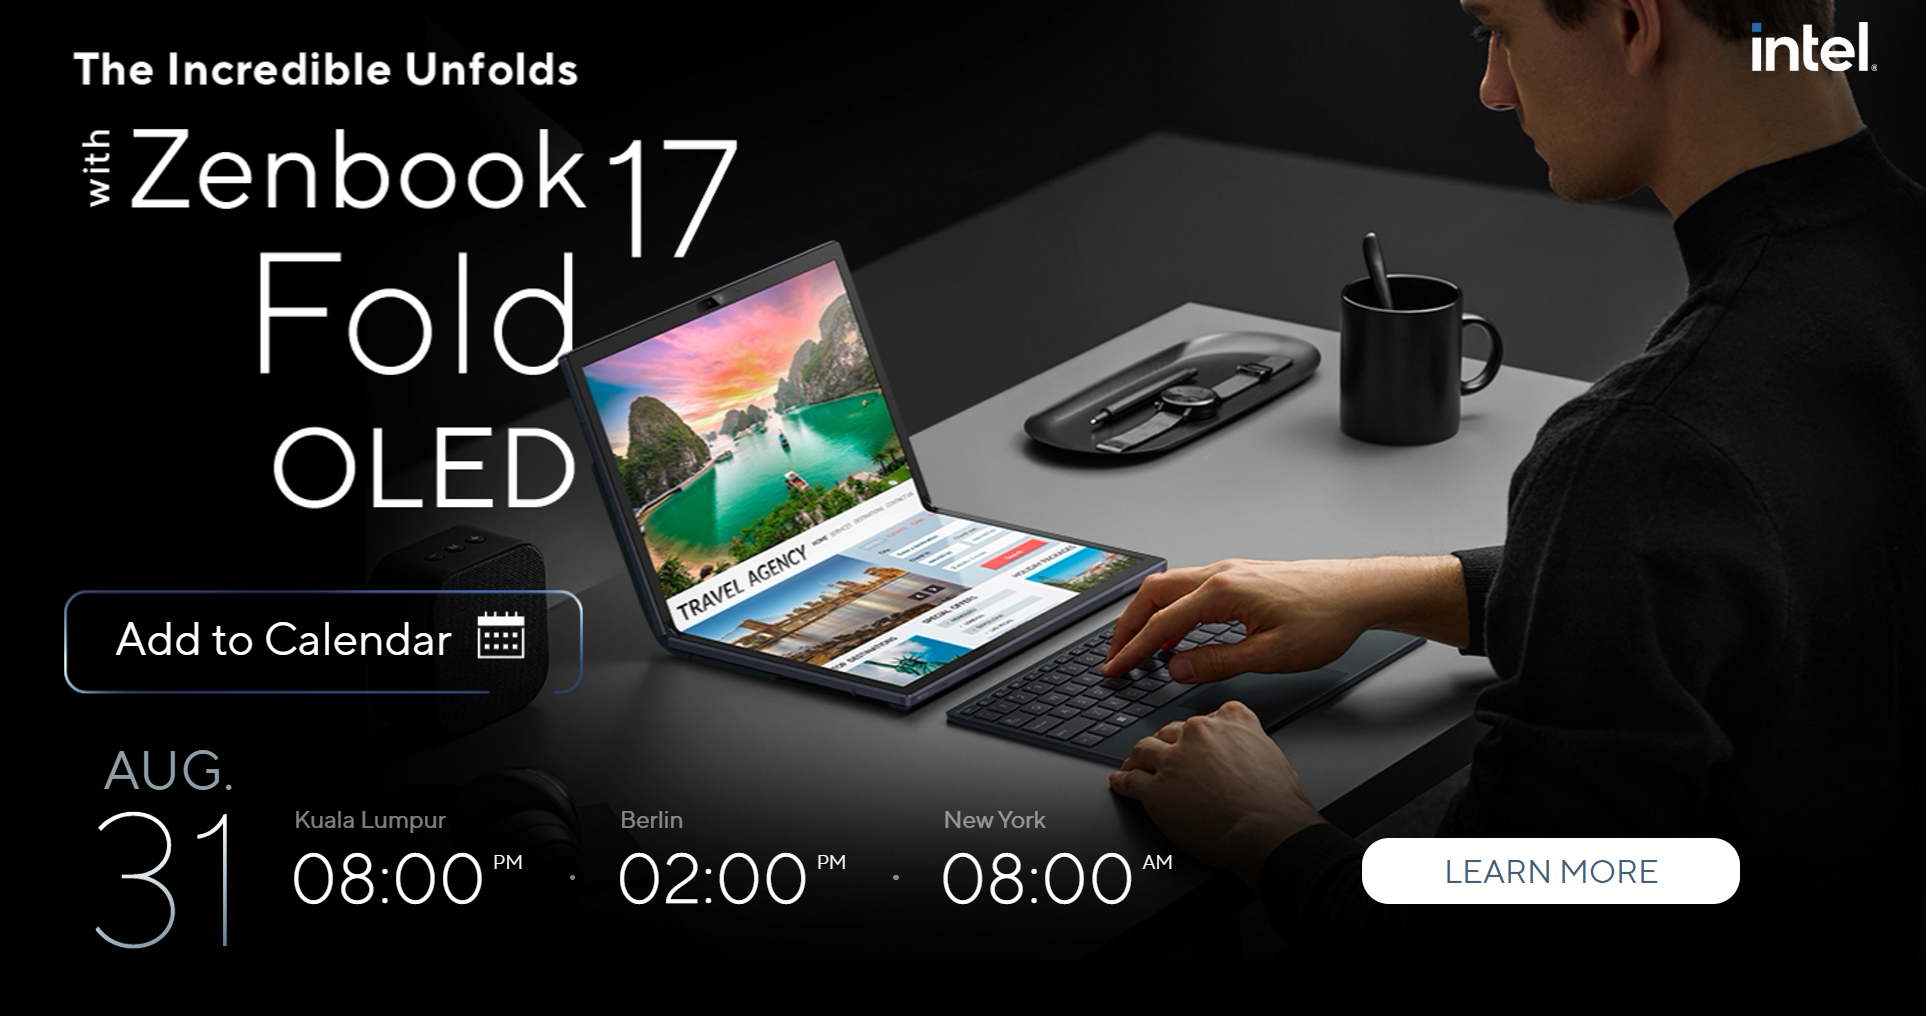 The Incredible Unfolds Zenbook 17 Fold OLED Global Launch